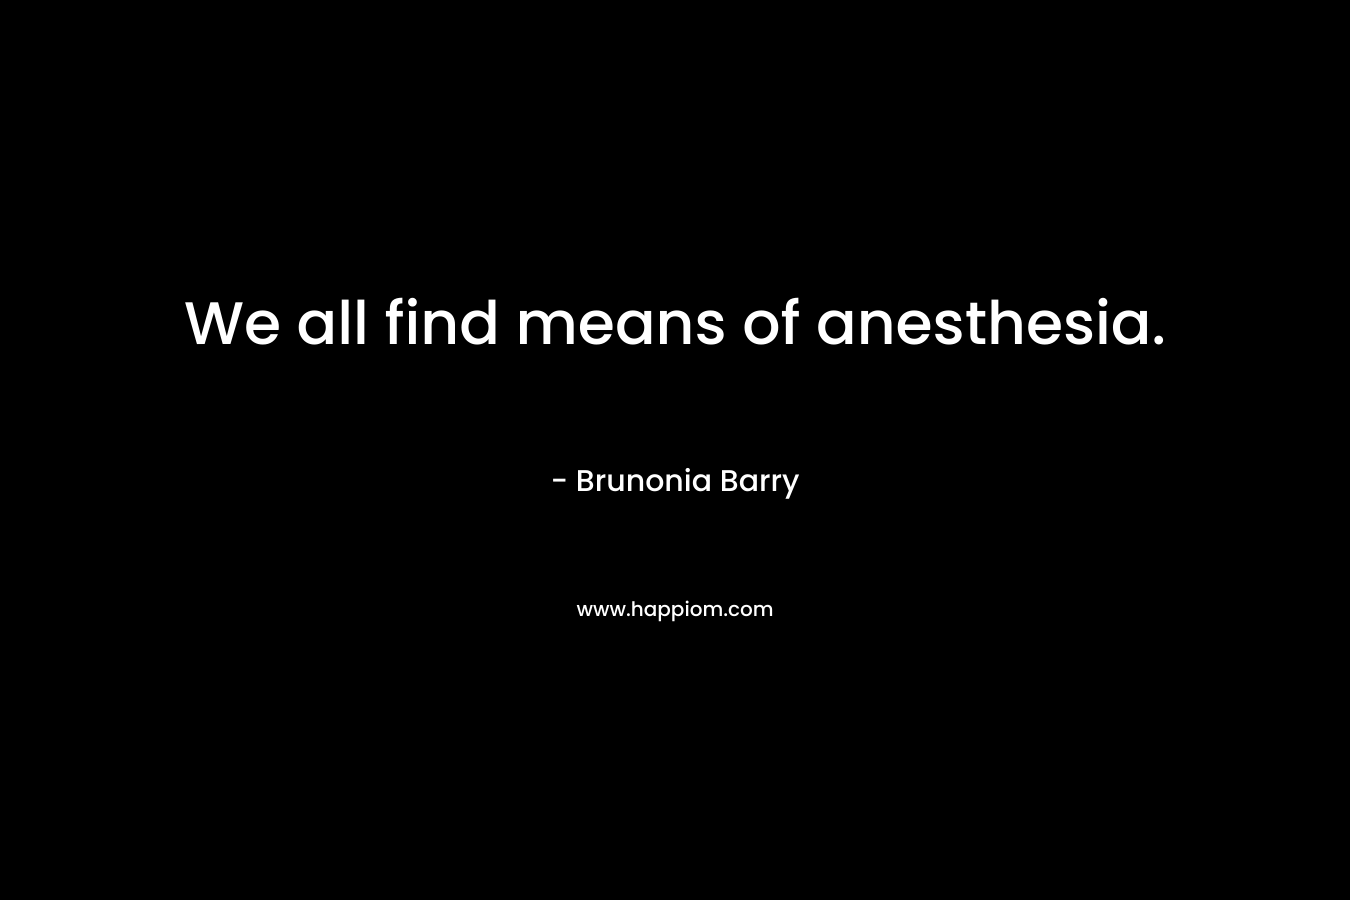 We all find means of anesthesia. – Brunonia Barry